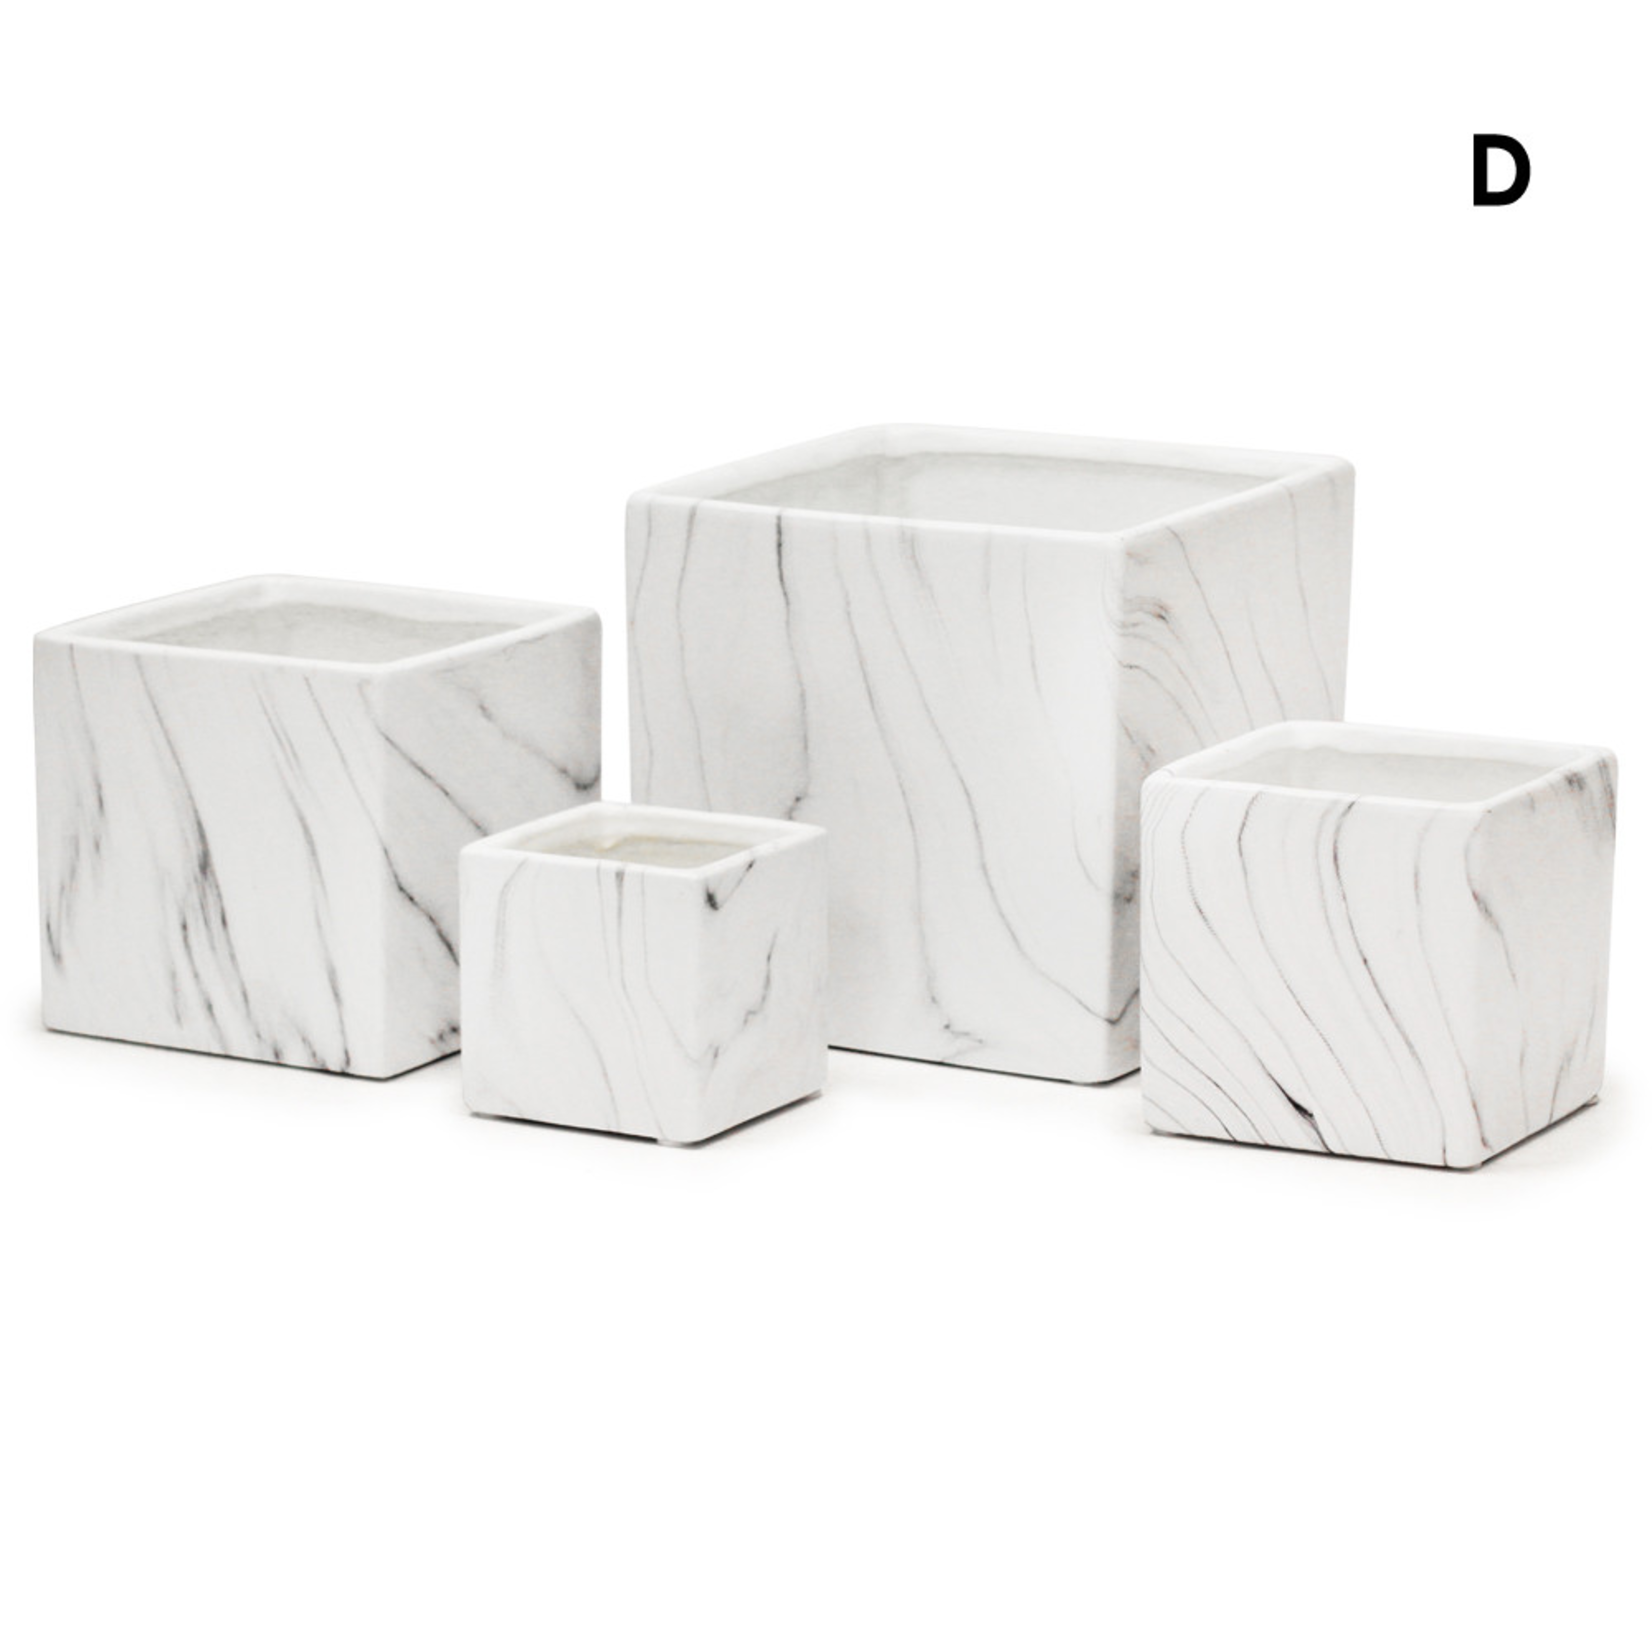 50% off was $12 now $6.00, 4.75"H X 5"X5" WHITE CERAMIC MARBLE CUBE SQUARE POT VASE